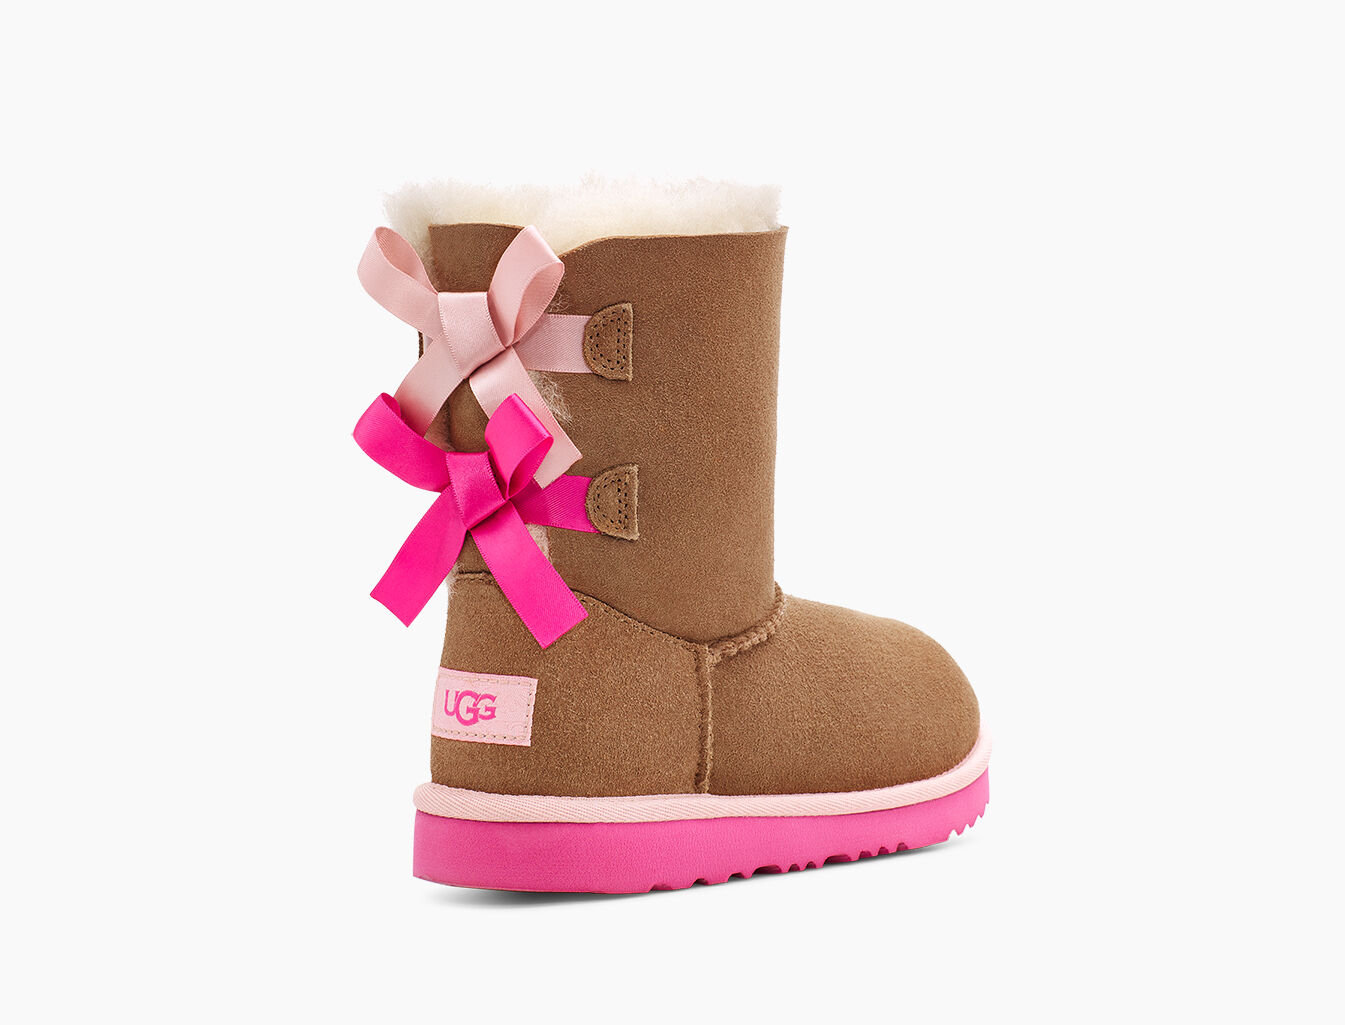 kid size uggs compared women's